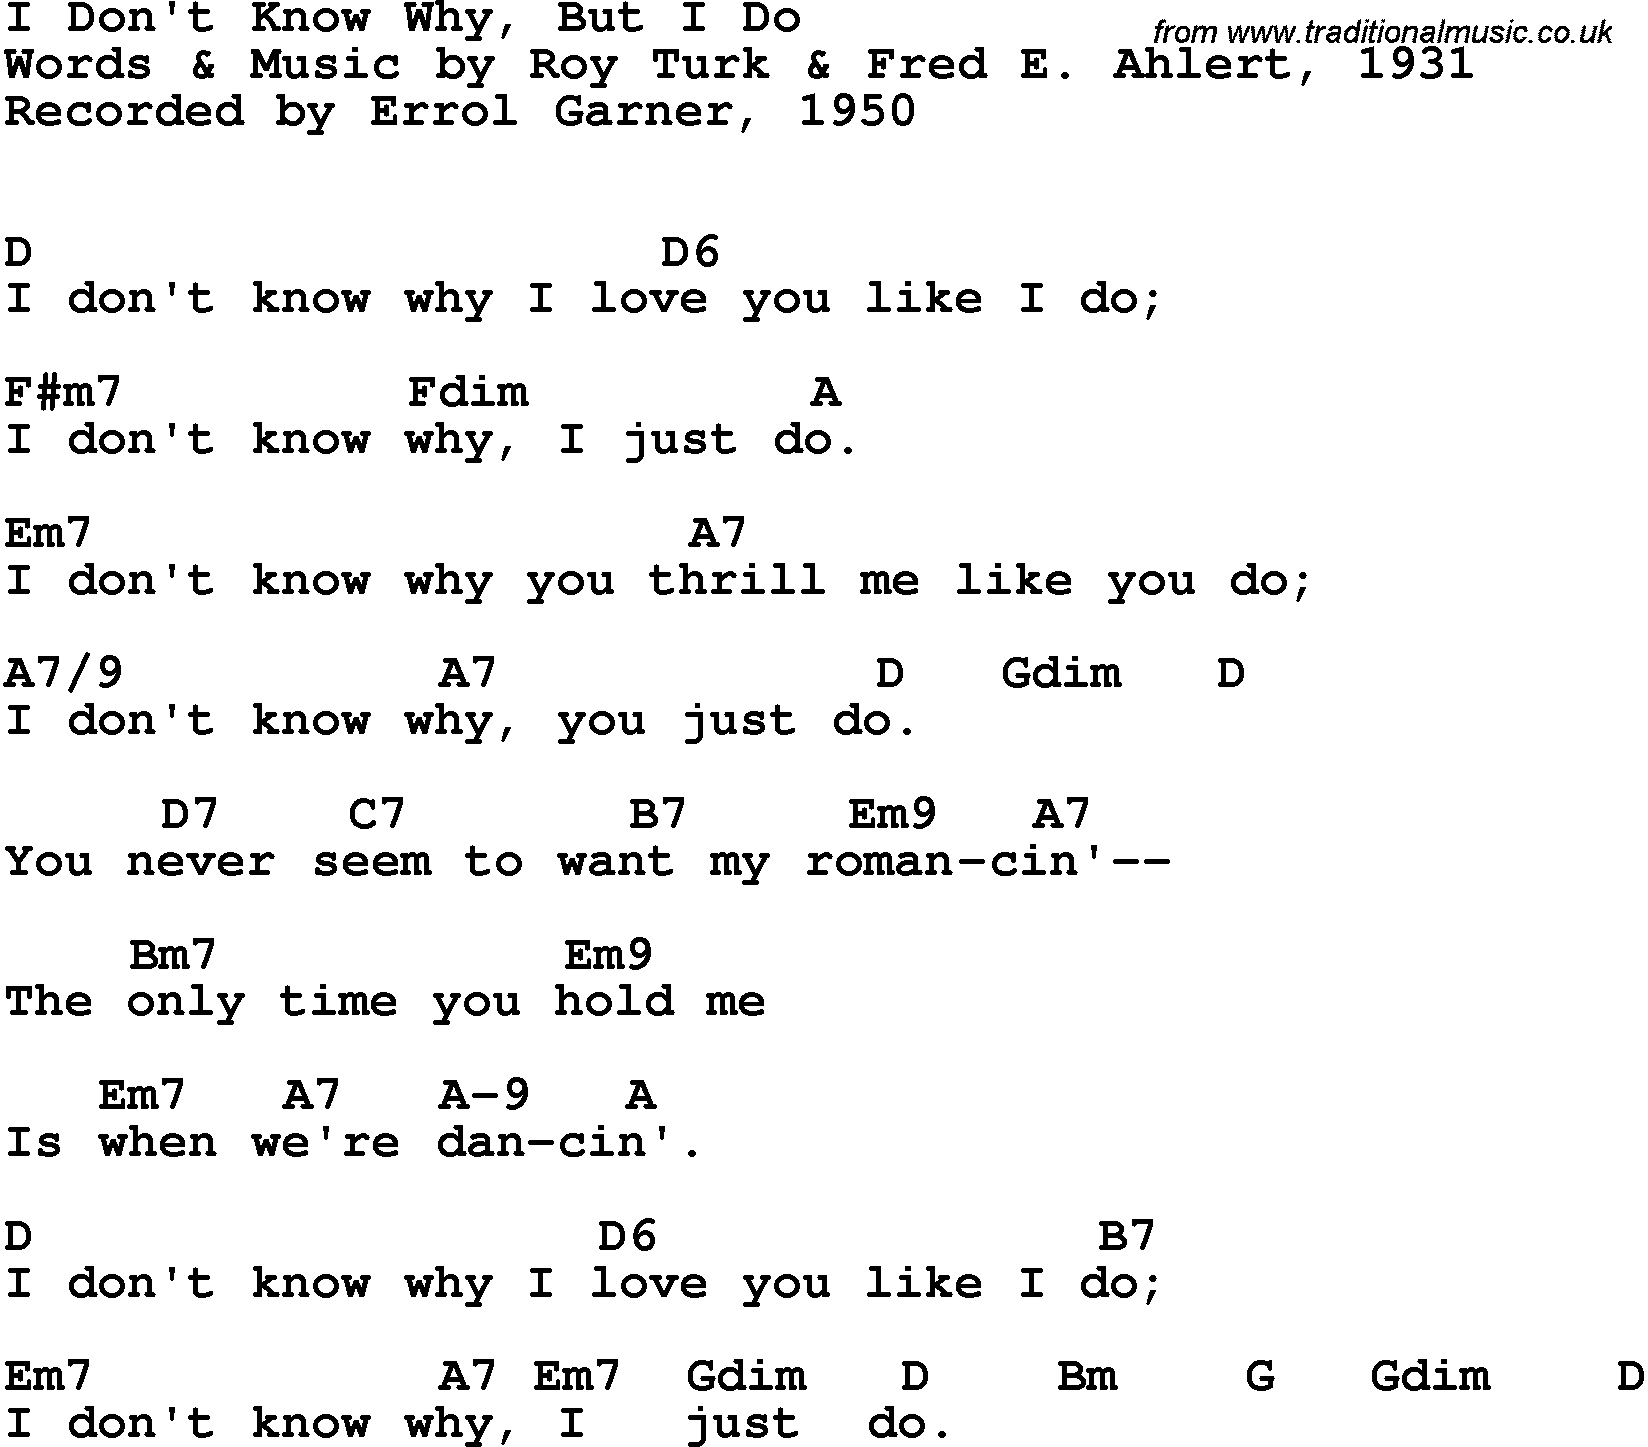 Song Lyrics with guitar chords for I Don't Know Why, But I Do - Erroll Garner, 1950